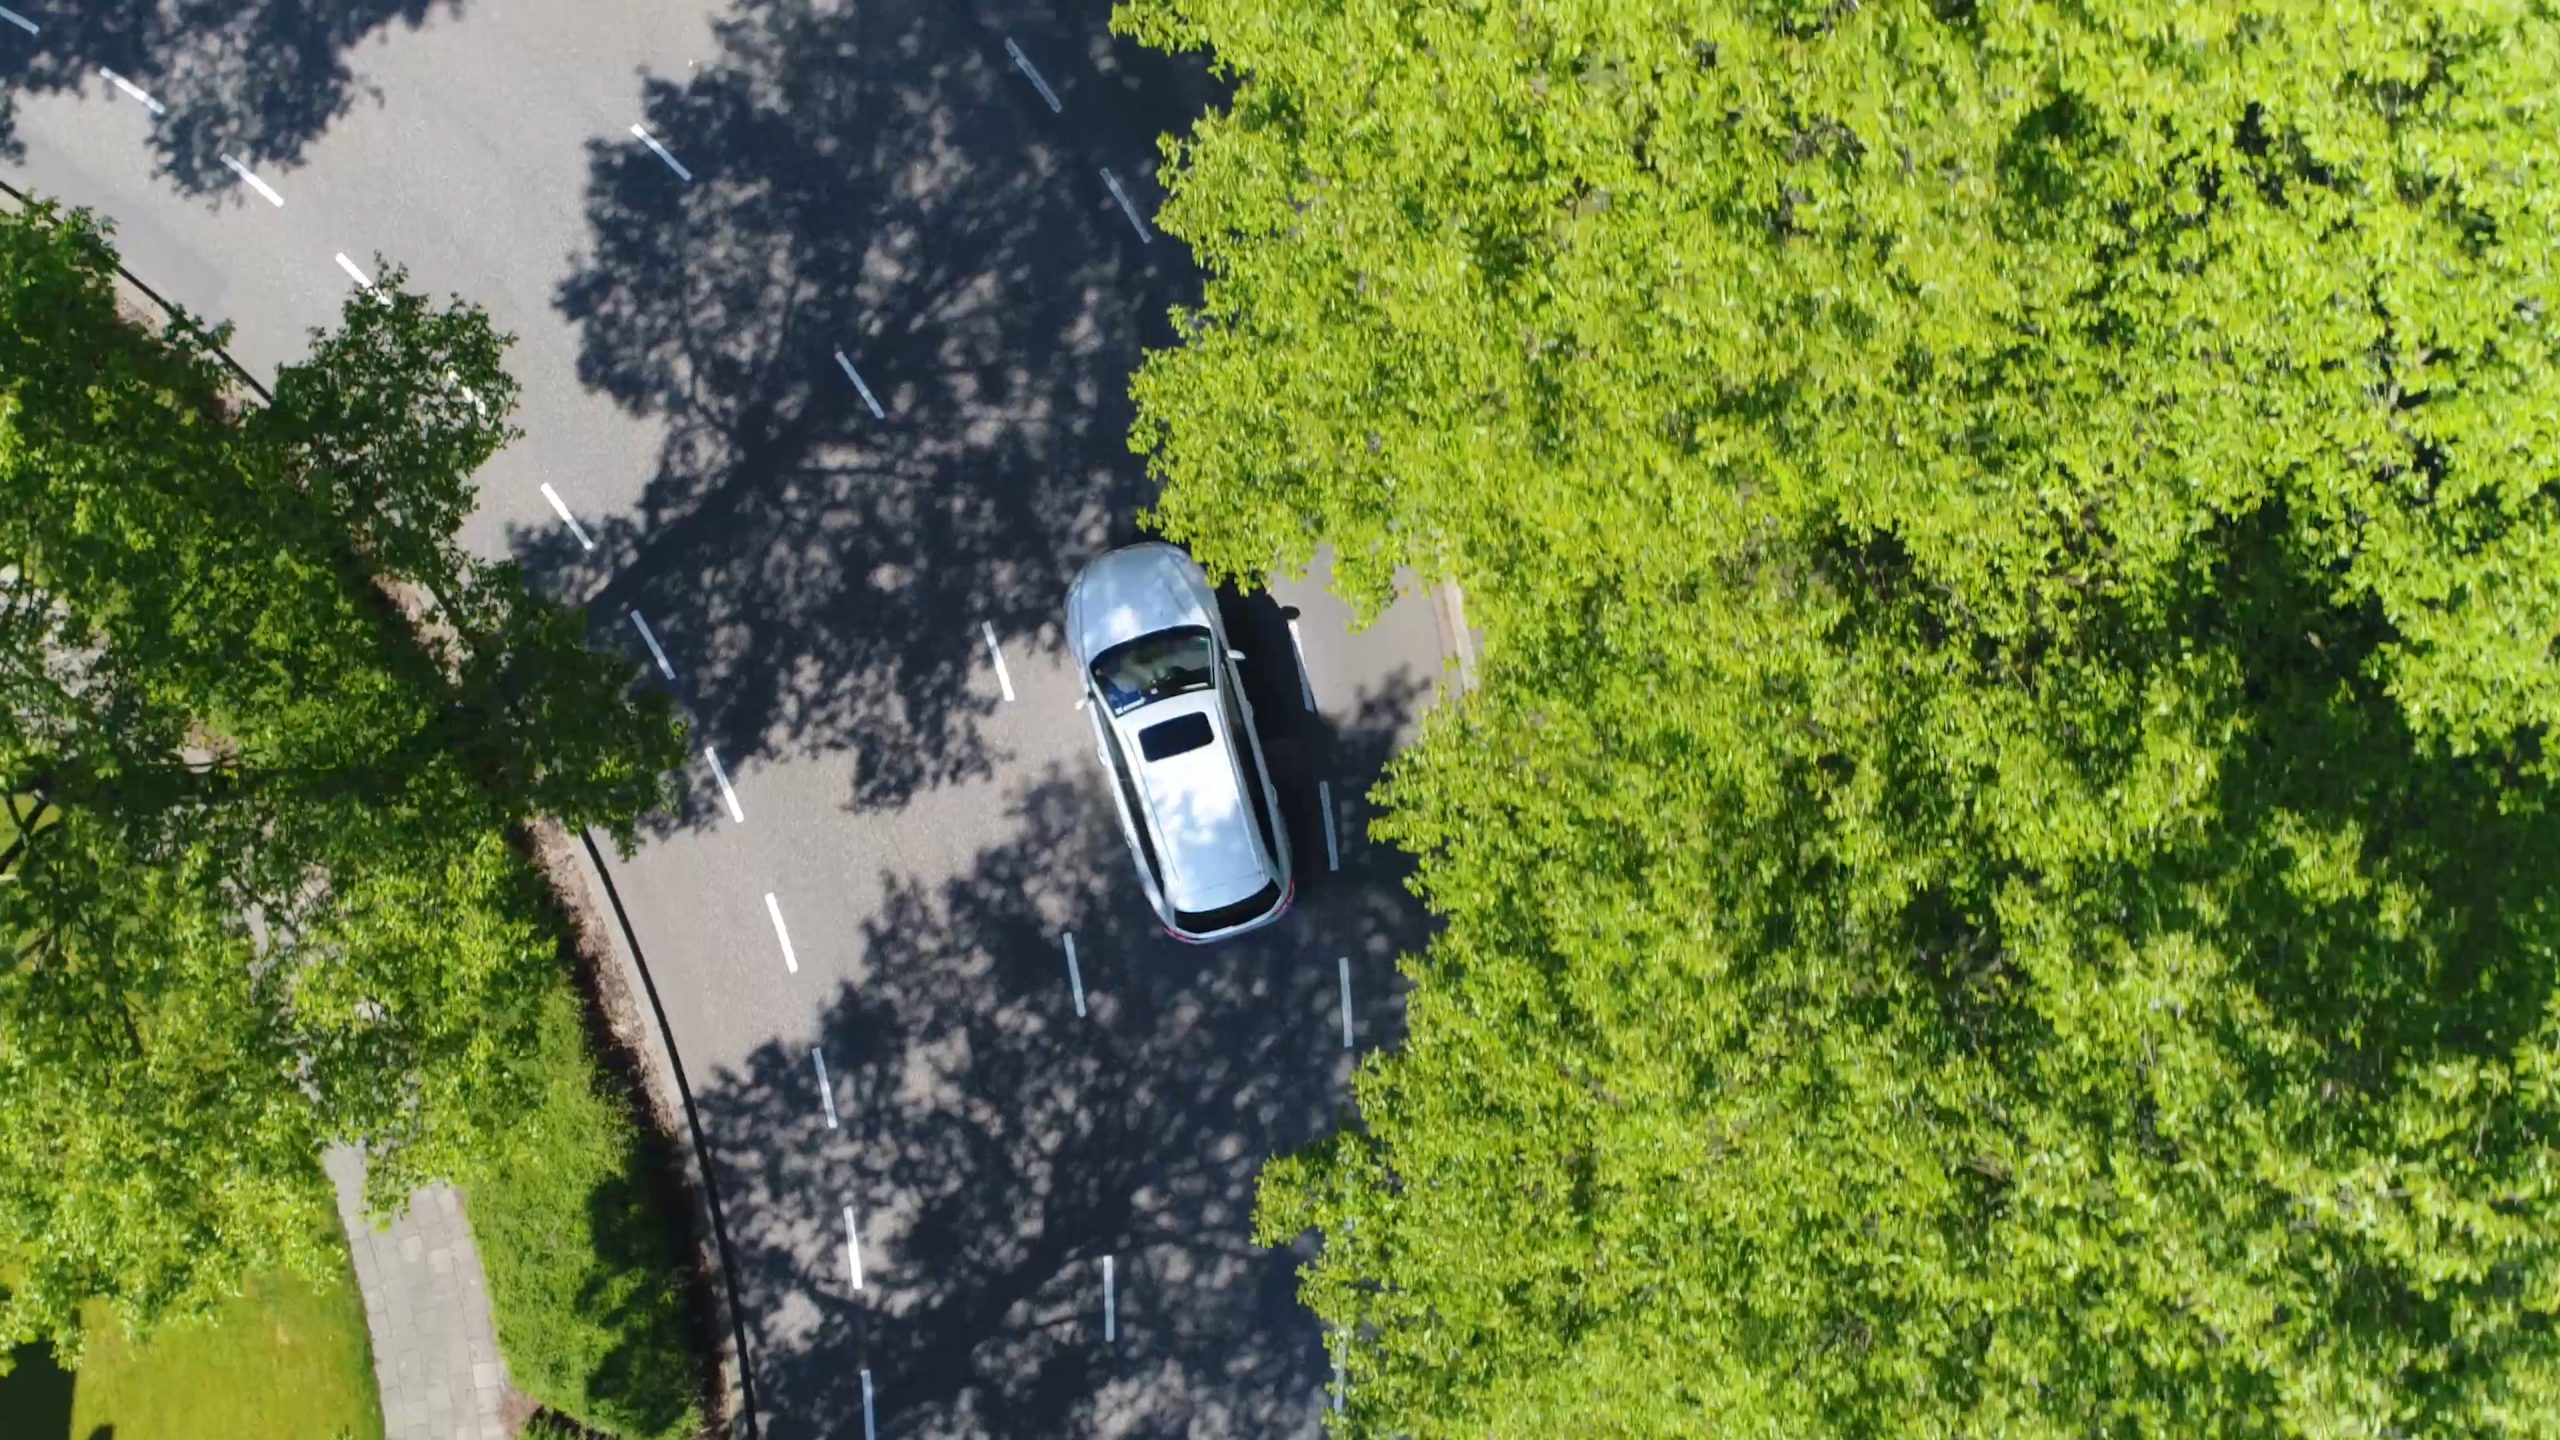 Drone picture overview of electric vehicle driving on road with trees